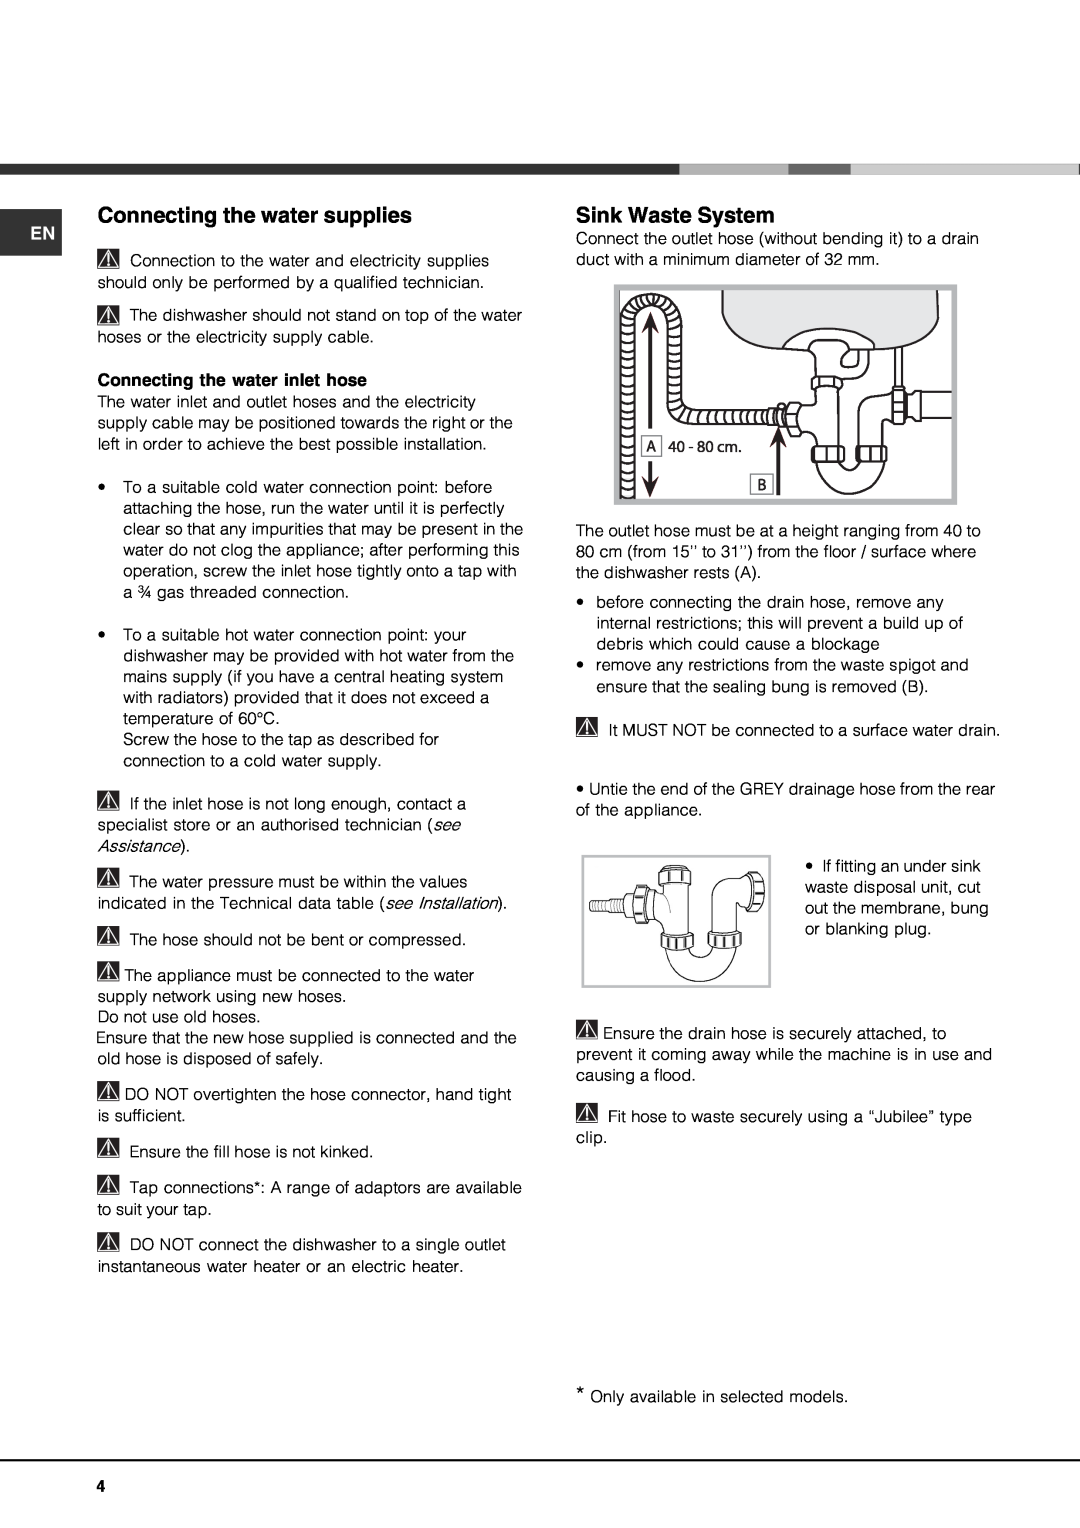 Hotpoint 1509)50-4 manual Connecting the water supplies, Sink Waste System, Connecting the water inlet hose 